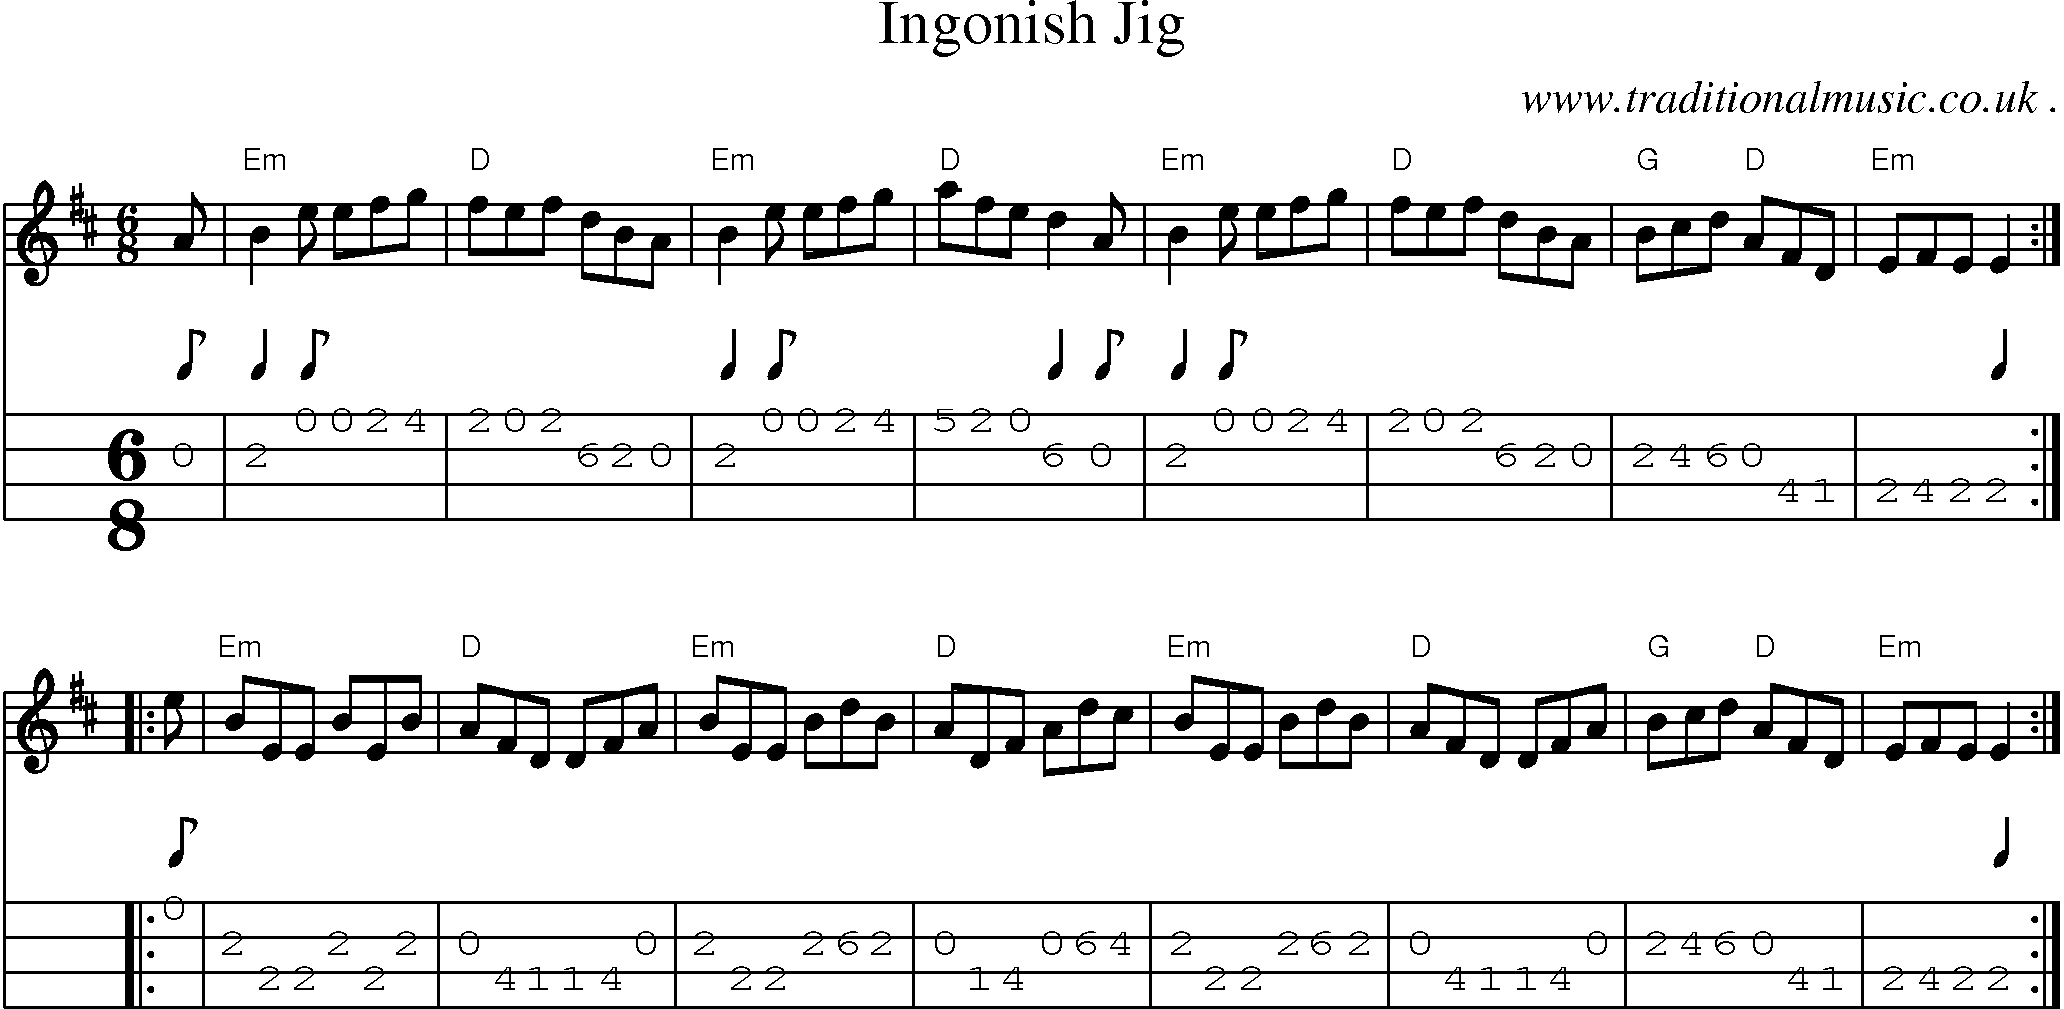 Sheet-music  score, Chords and Mandolin Tabs for Ingonish Jig